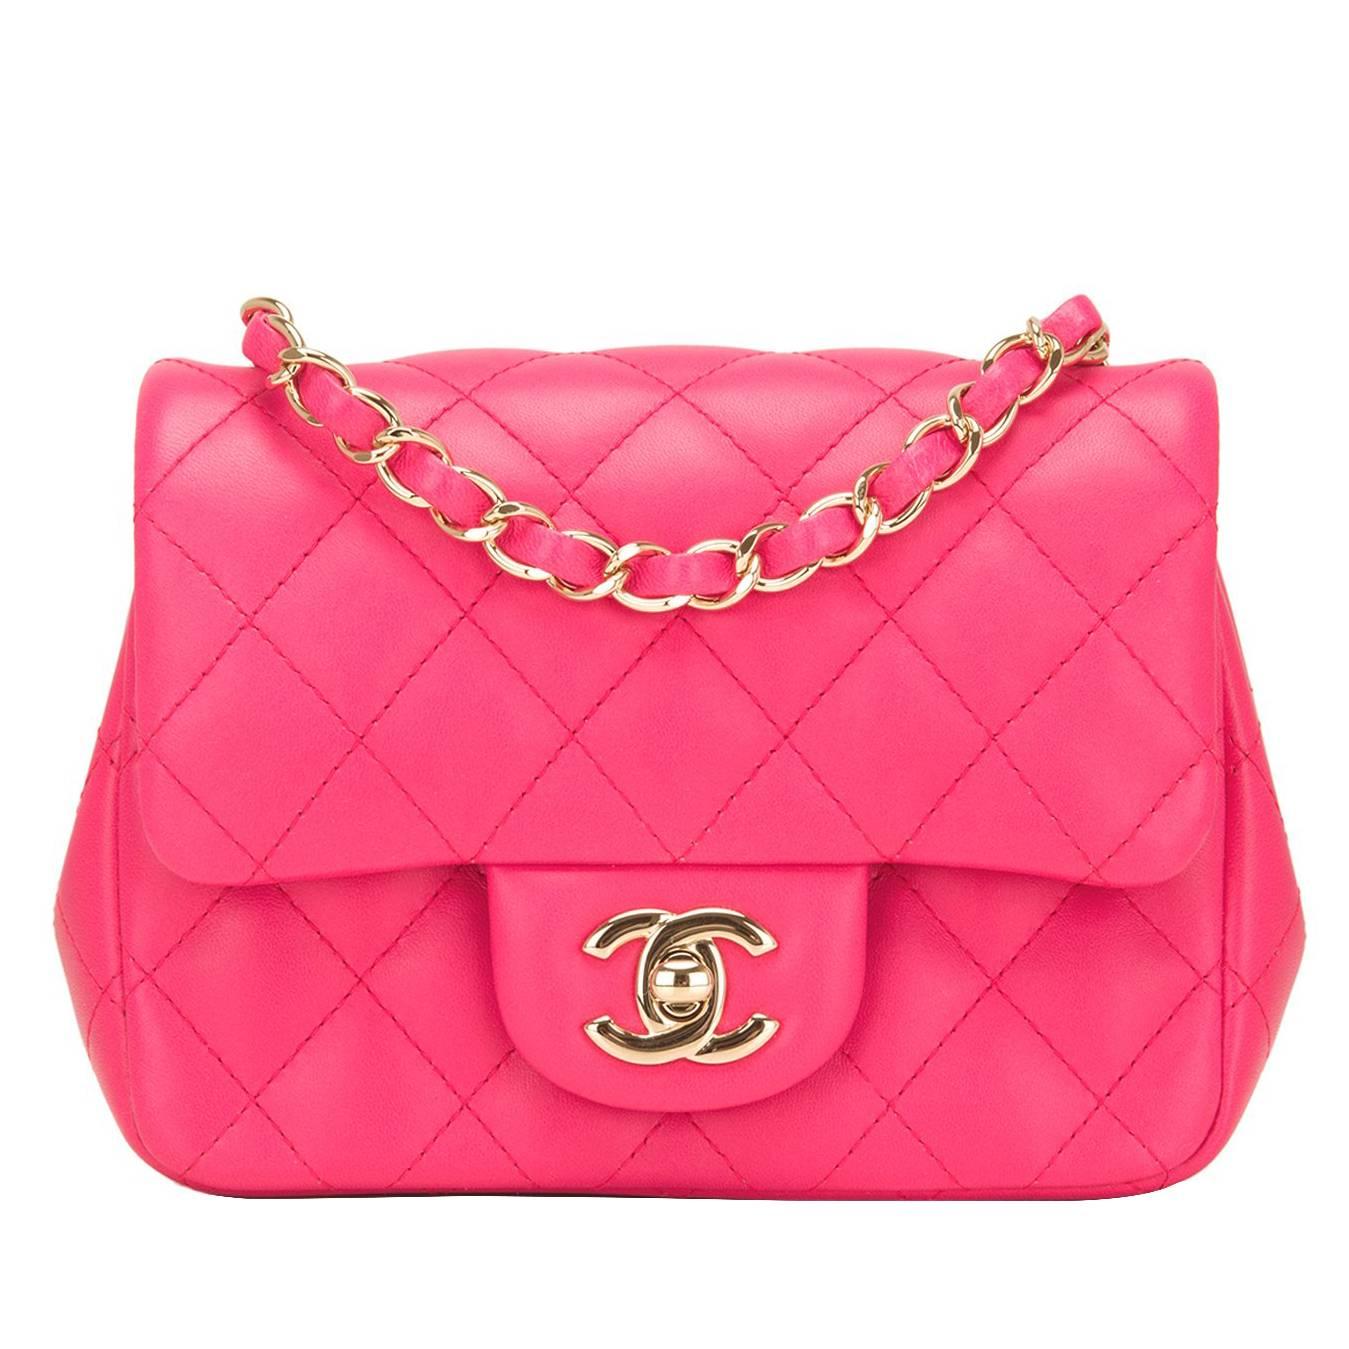 Chanel Fuchsia Quilted Lambskin Square Mini Flap Bag